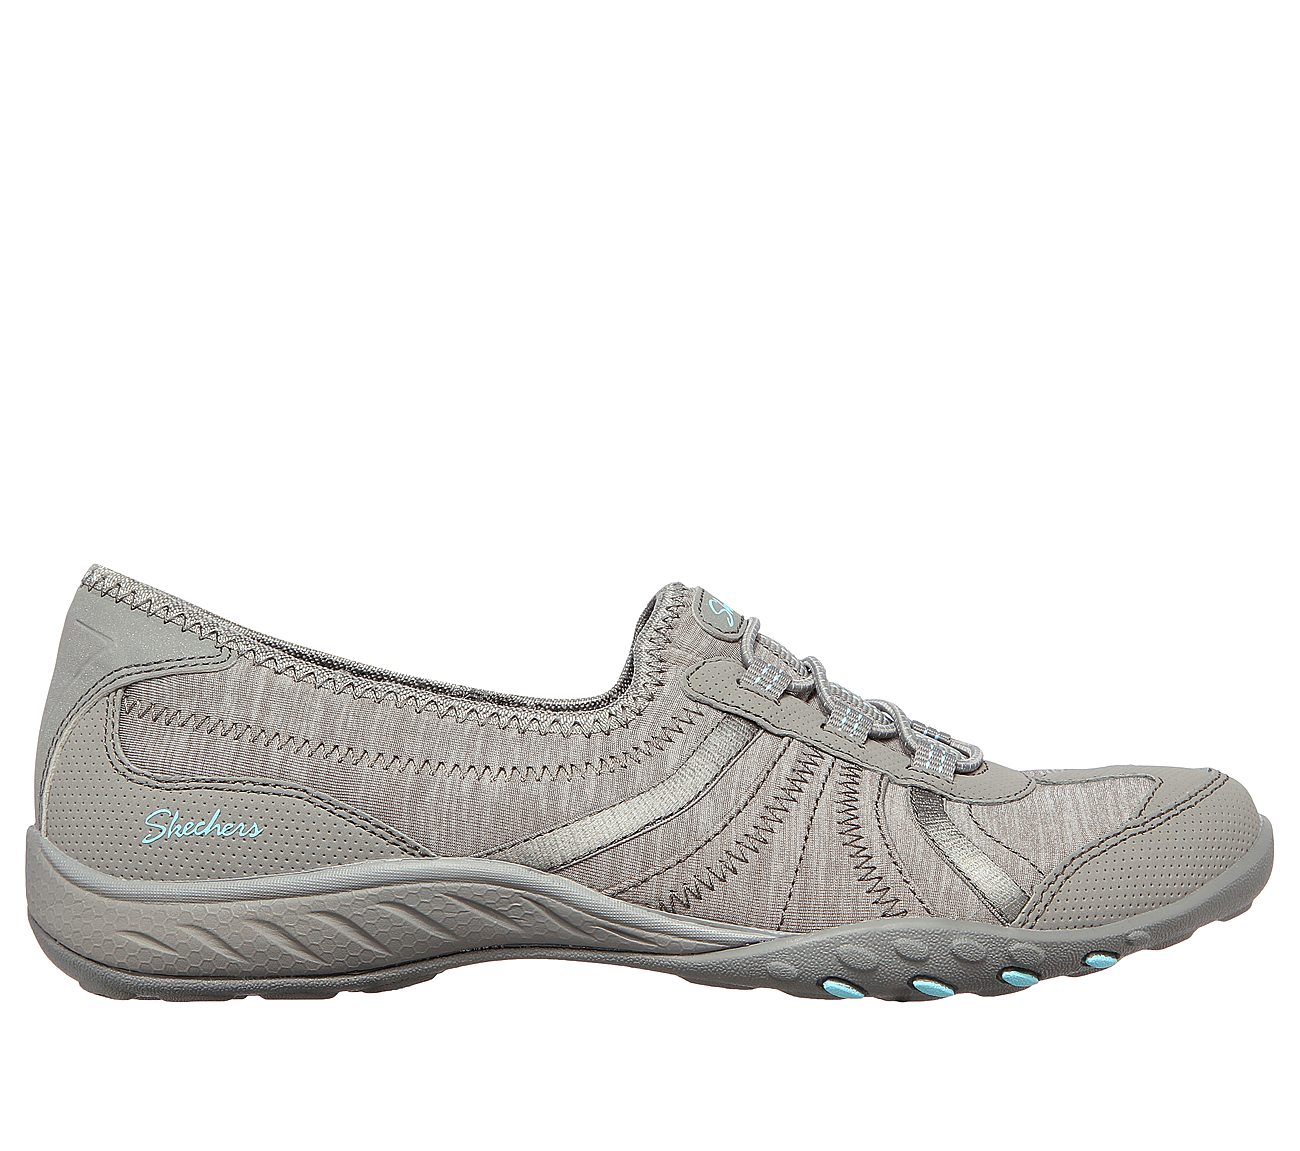 skechers relaxed fit breathe easy cool it women's comfort shoes